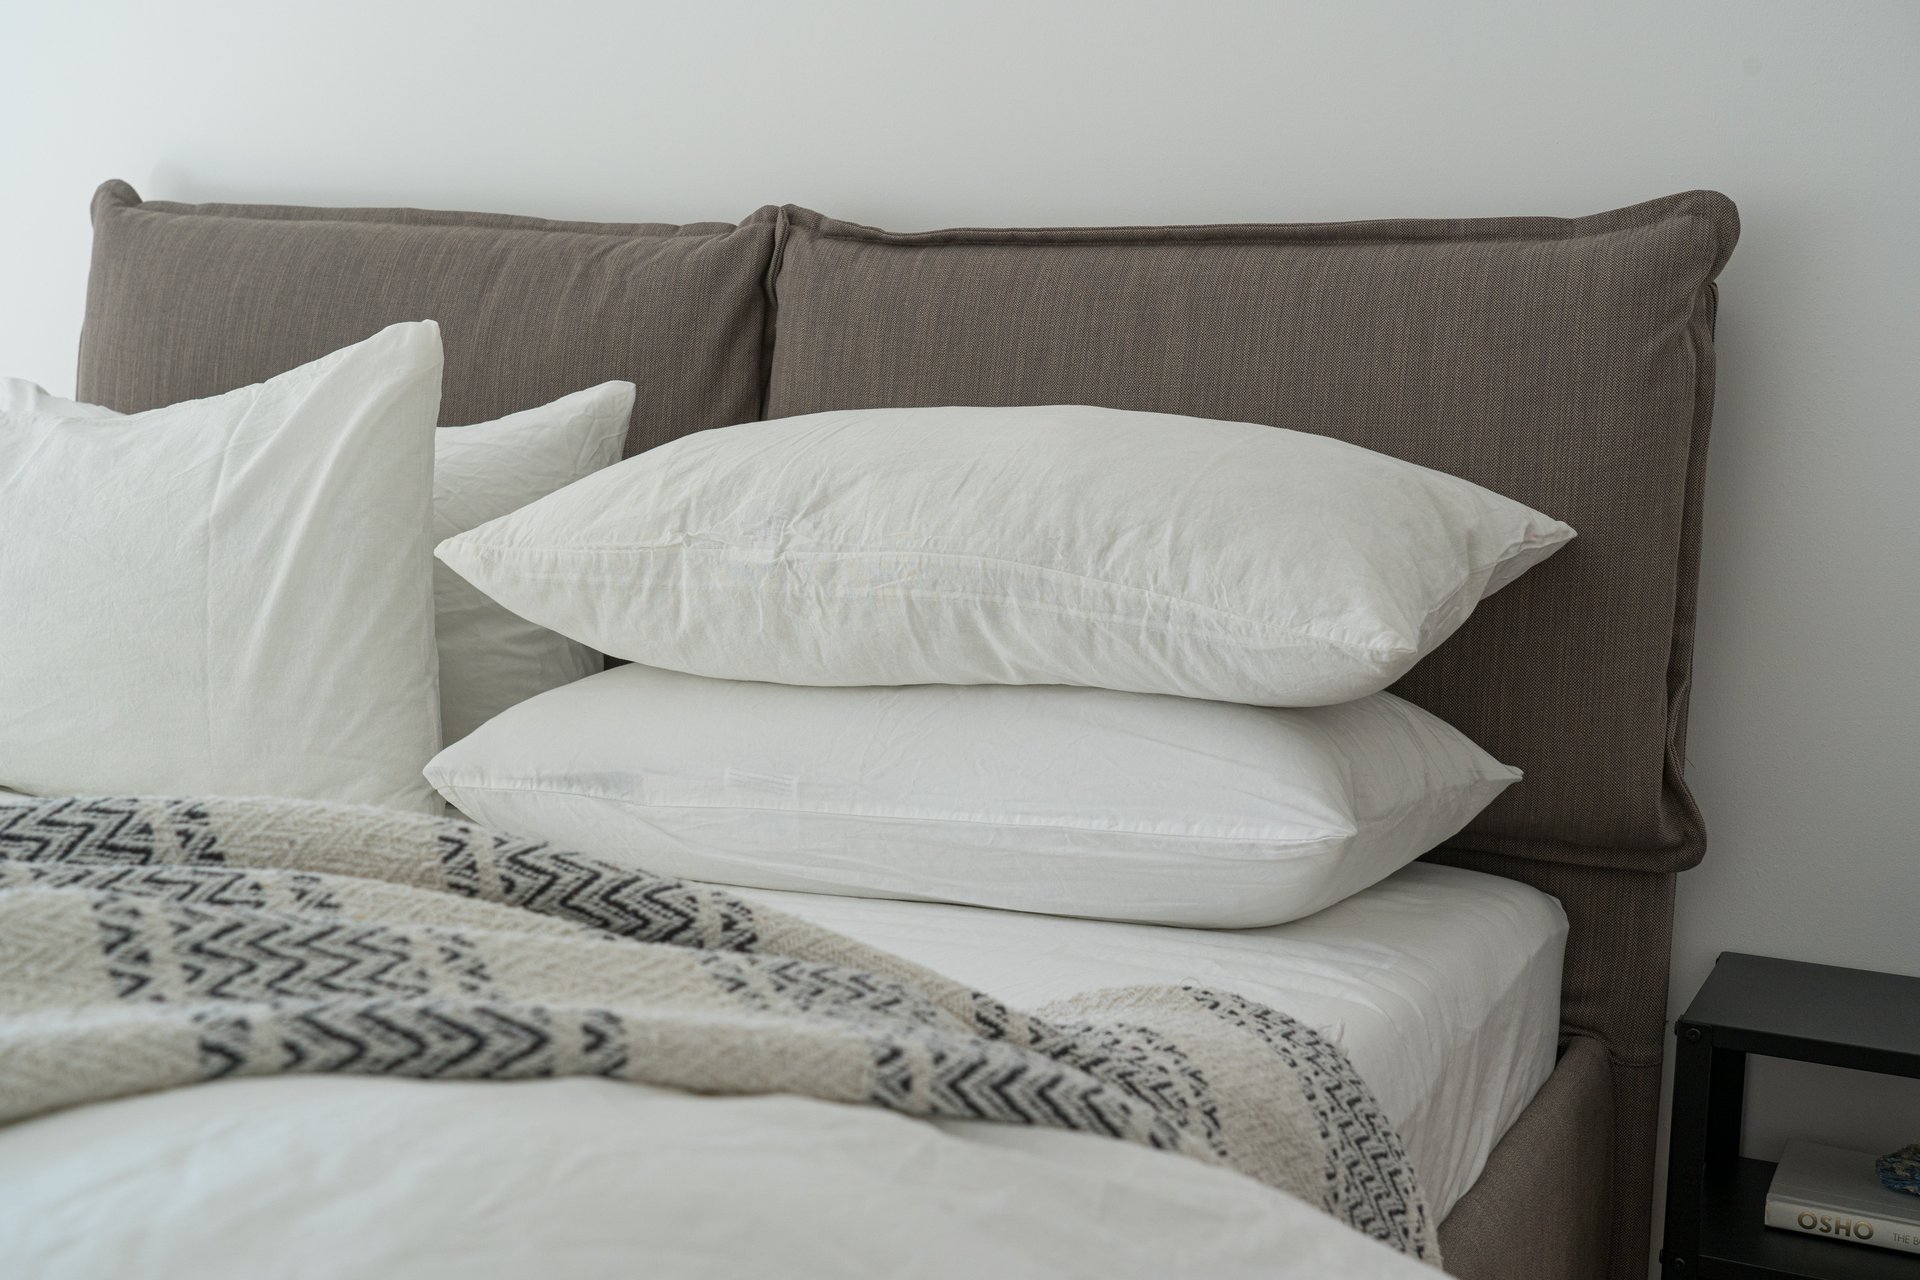 White pillows on a bed. Washing bed sheets at the highest setting is a good way to prevent bed bugs.